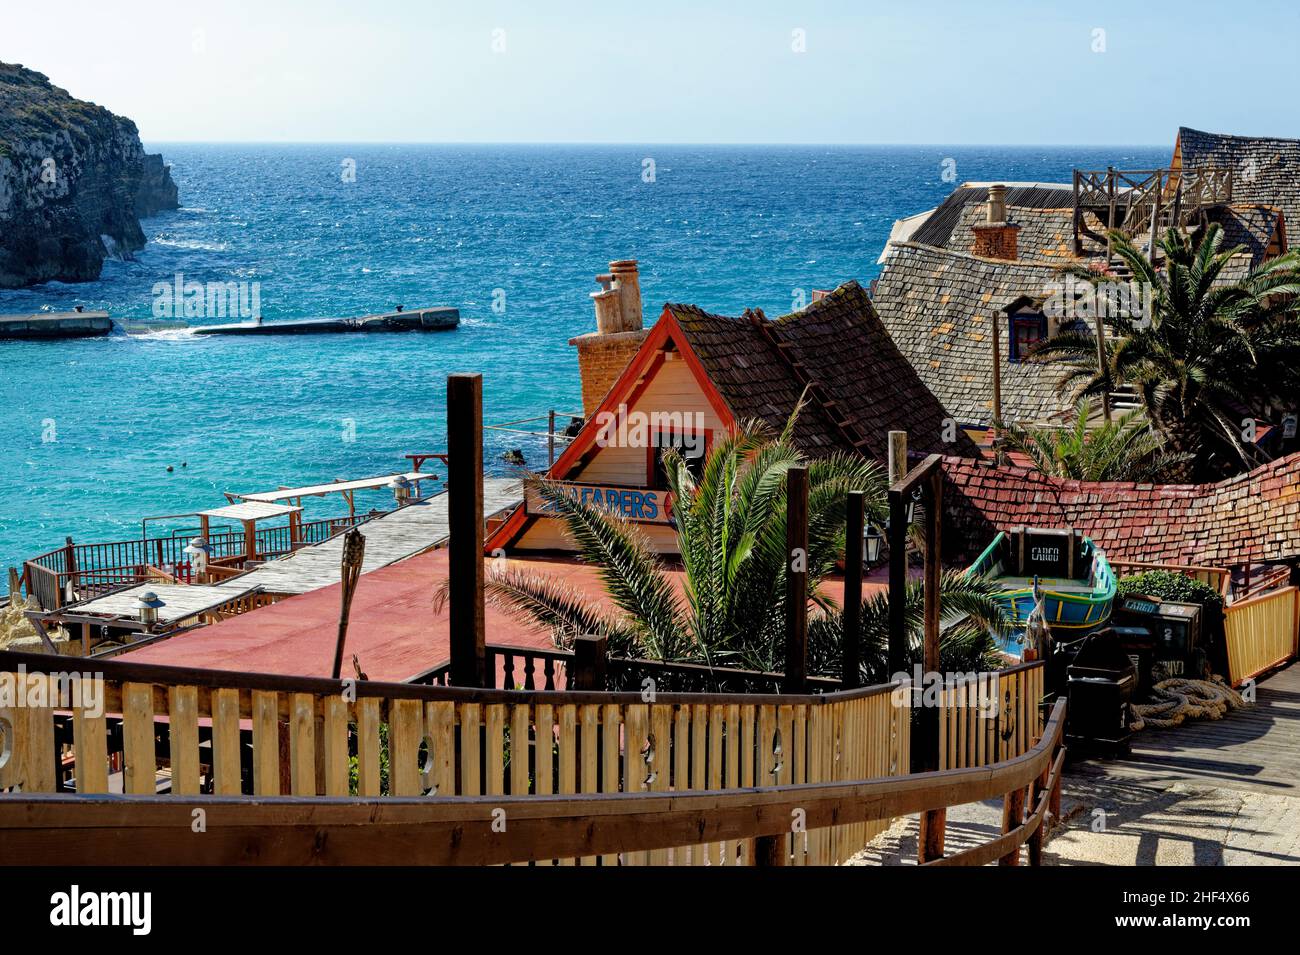 Malta - Popeye Village in Anchor Bay - Sweethaven Village. 1st of February 2016 Stock Photo